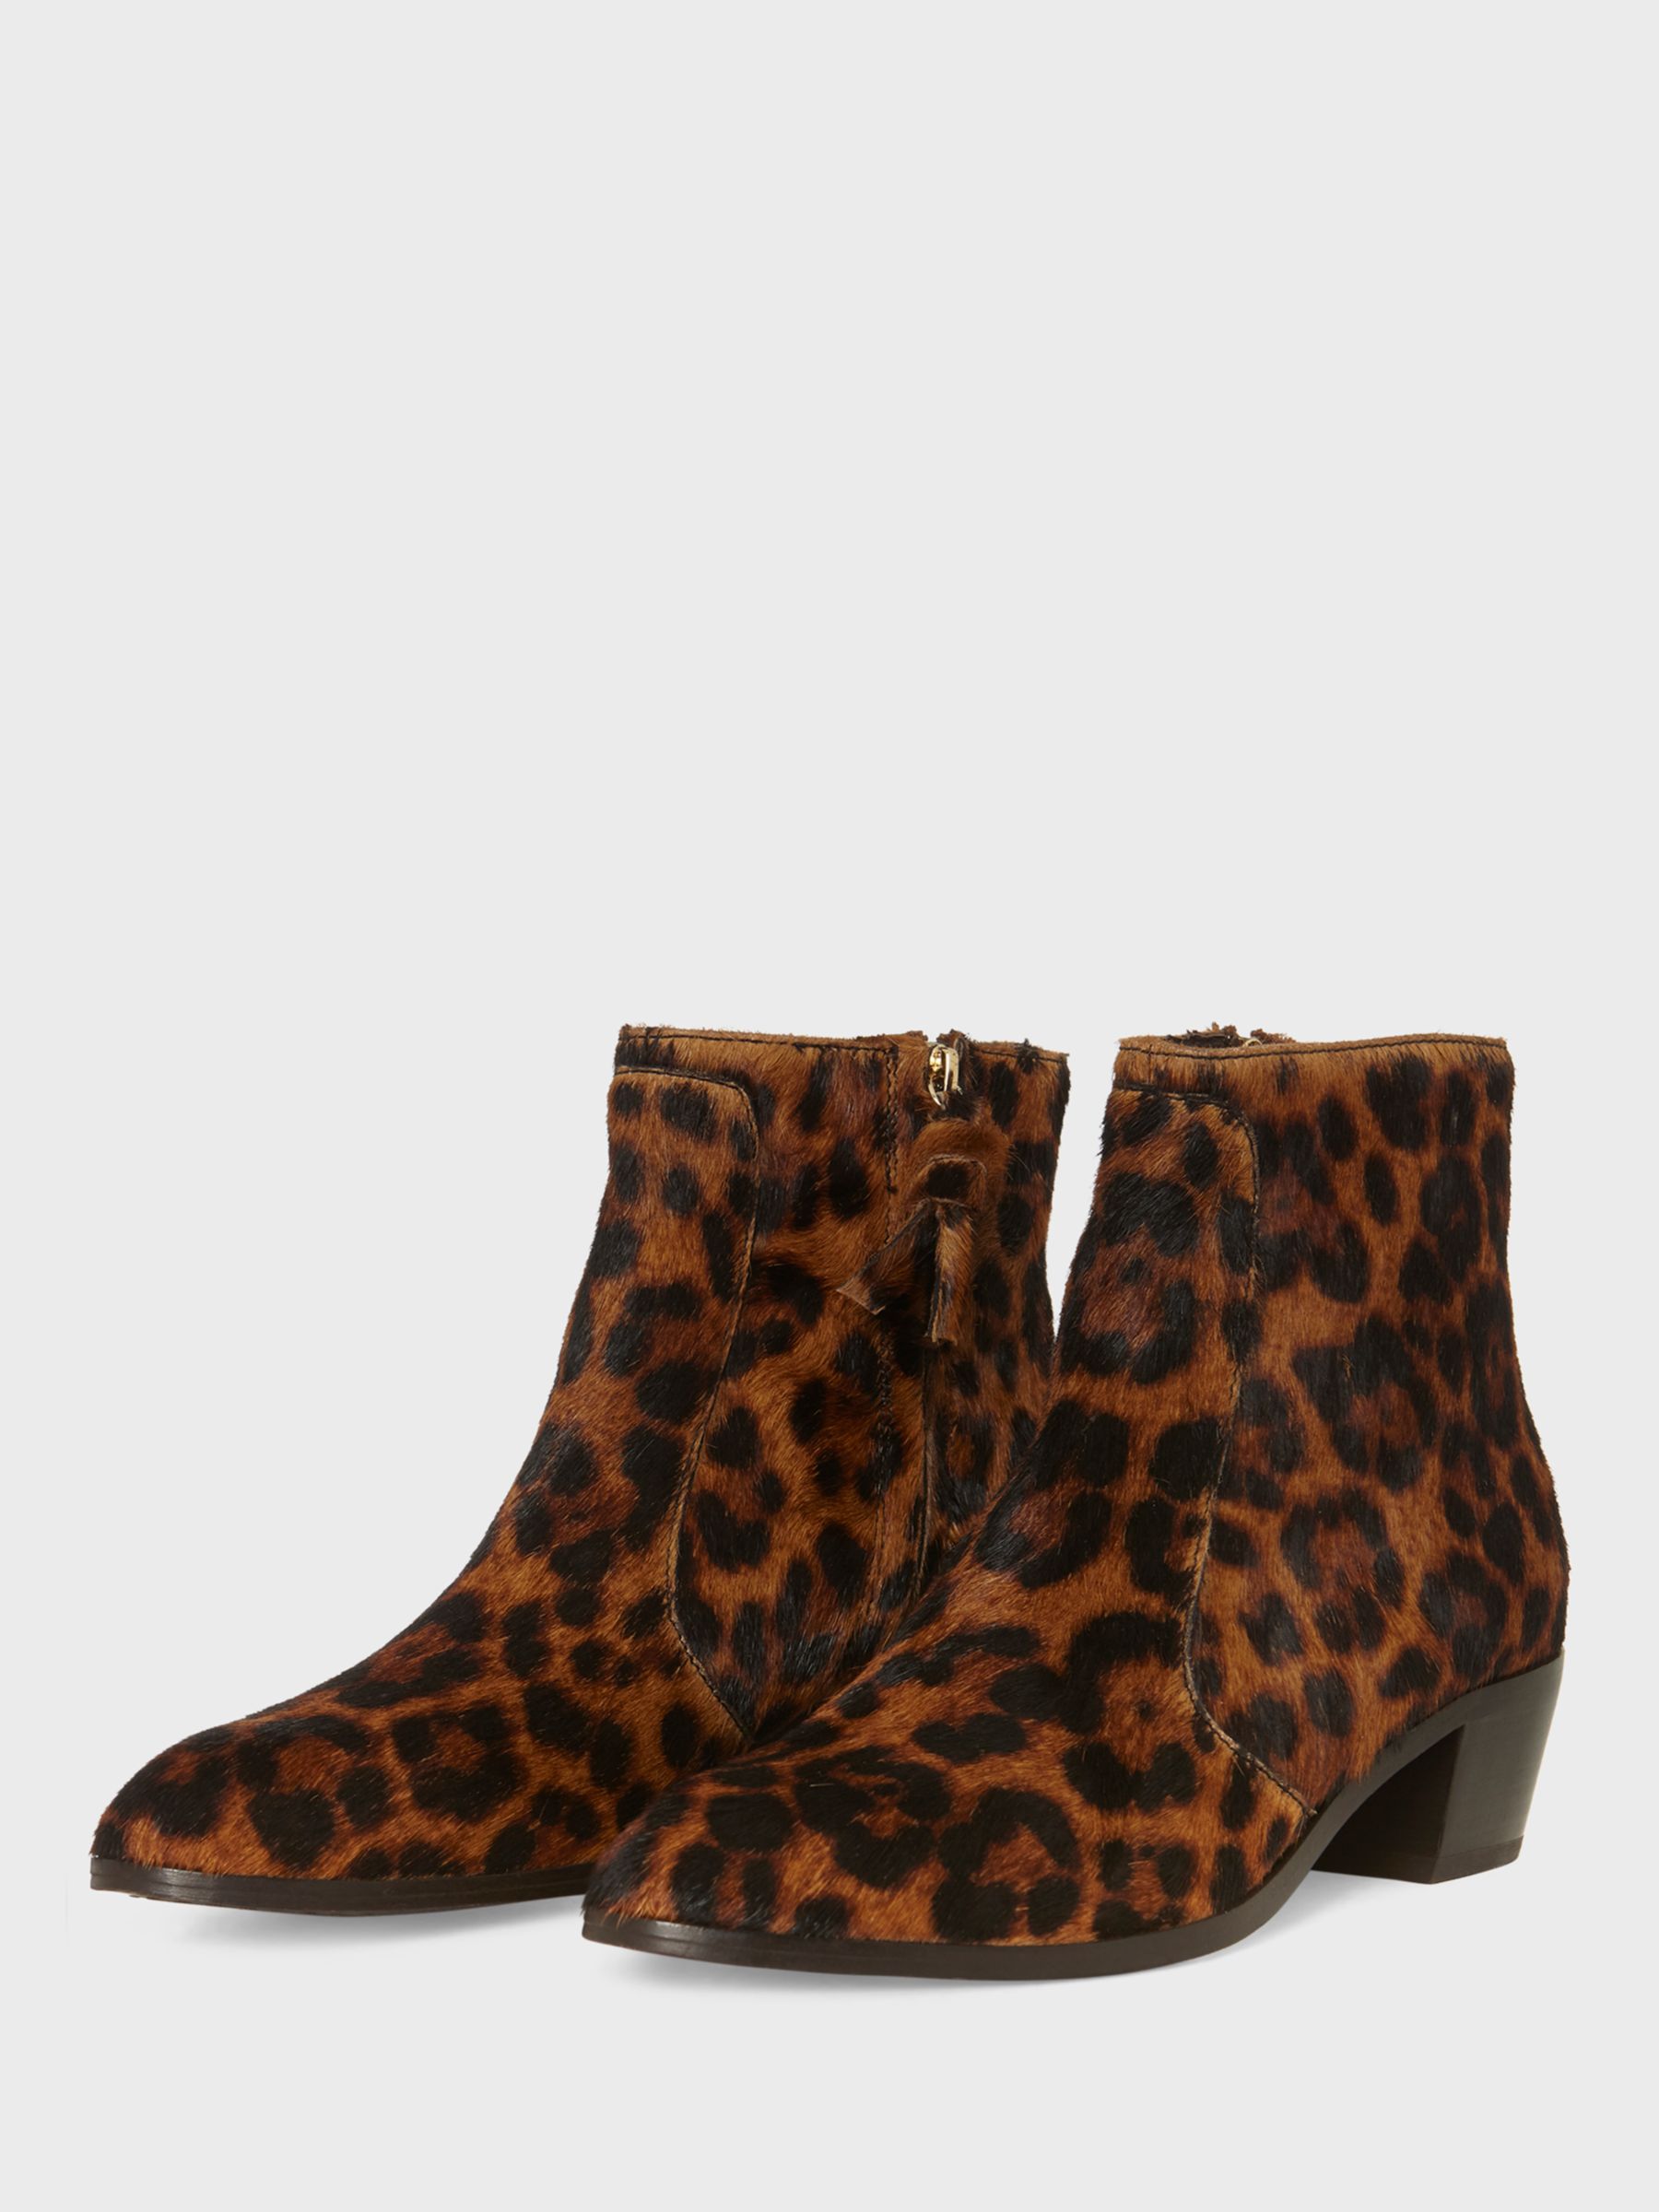 Hobbs Shona Leather Ankle Boots, Tan at John Lewis & Partners